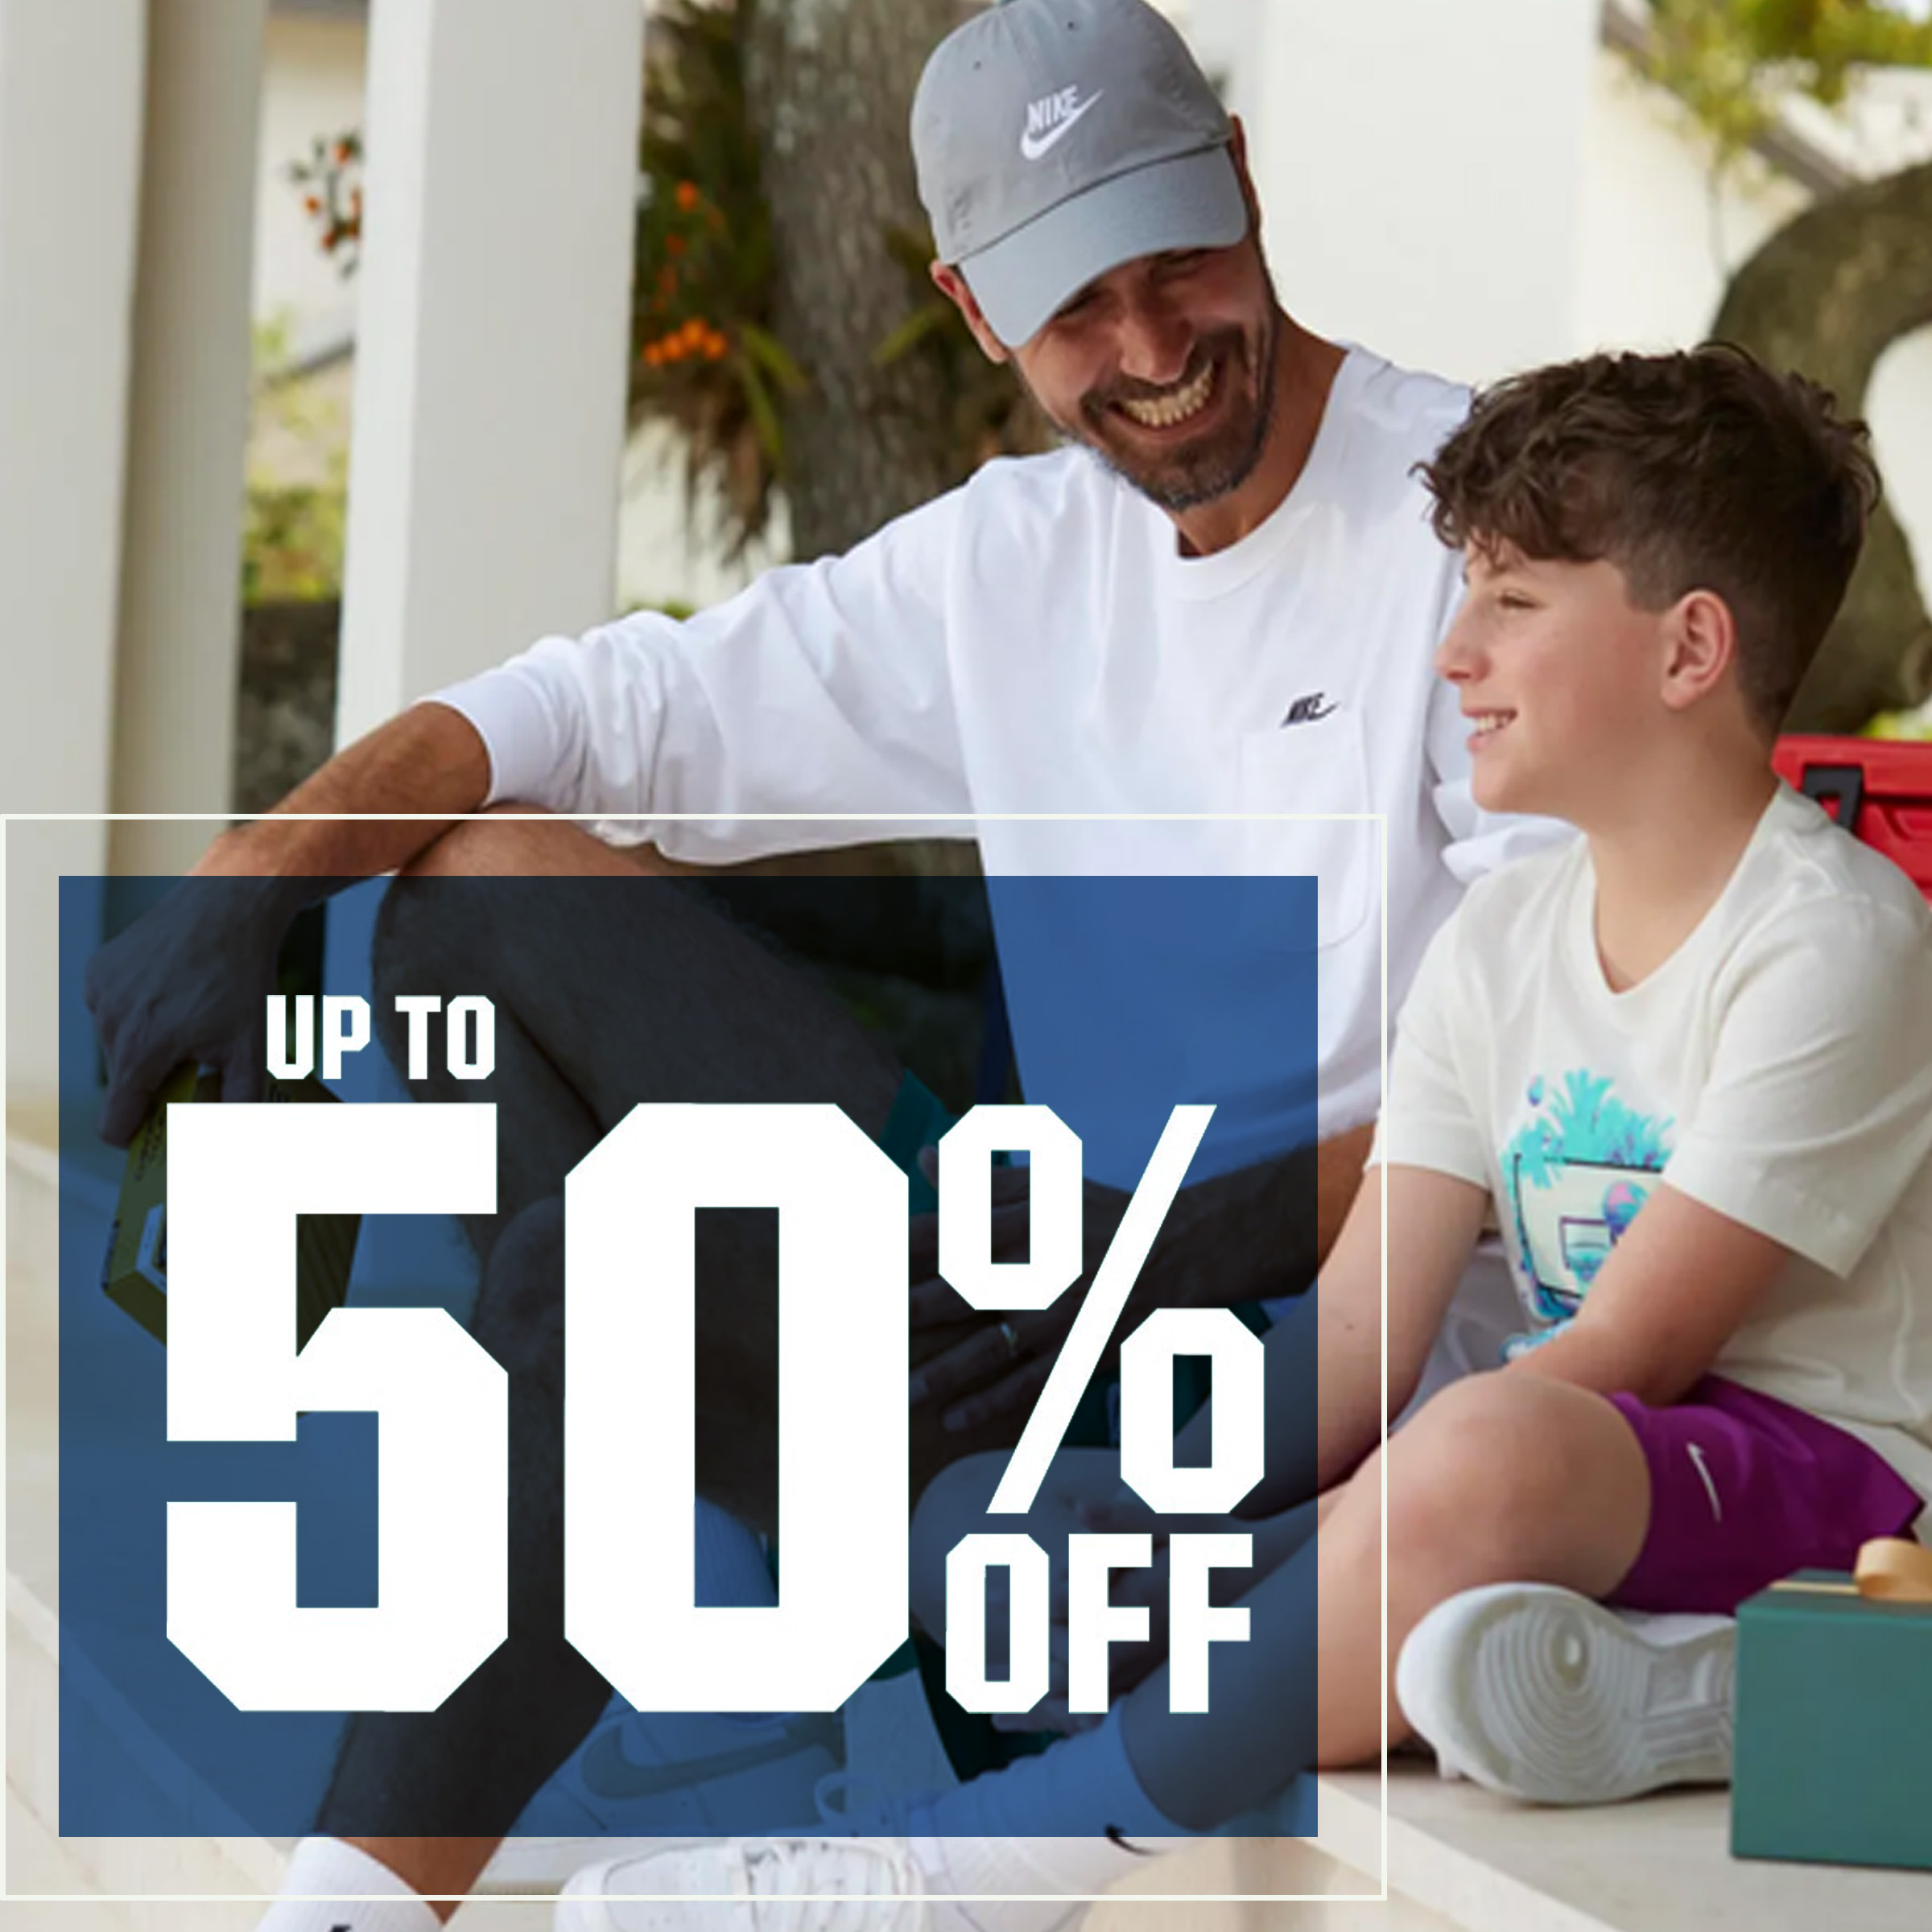  Up to 50% off.